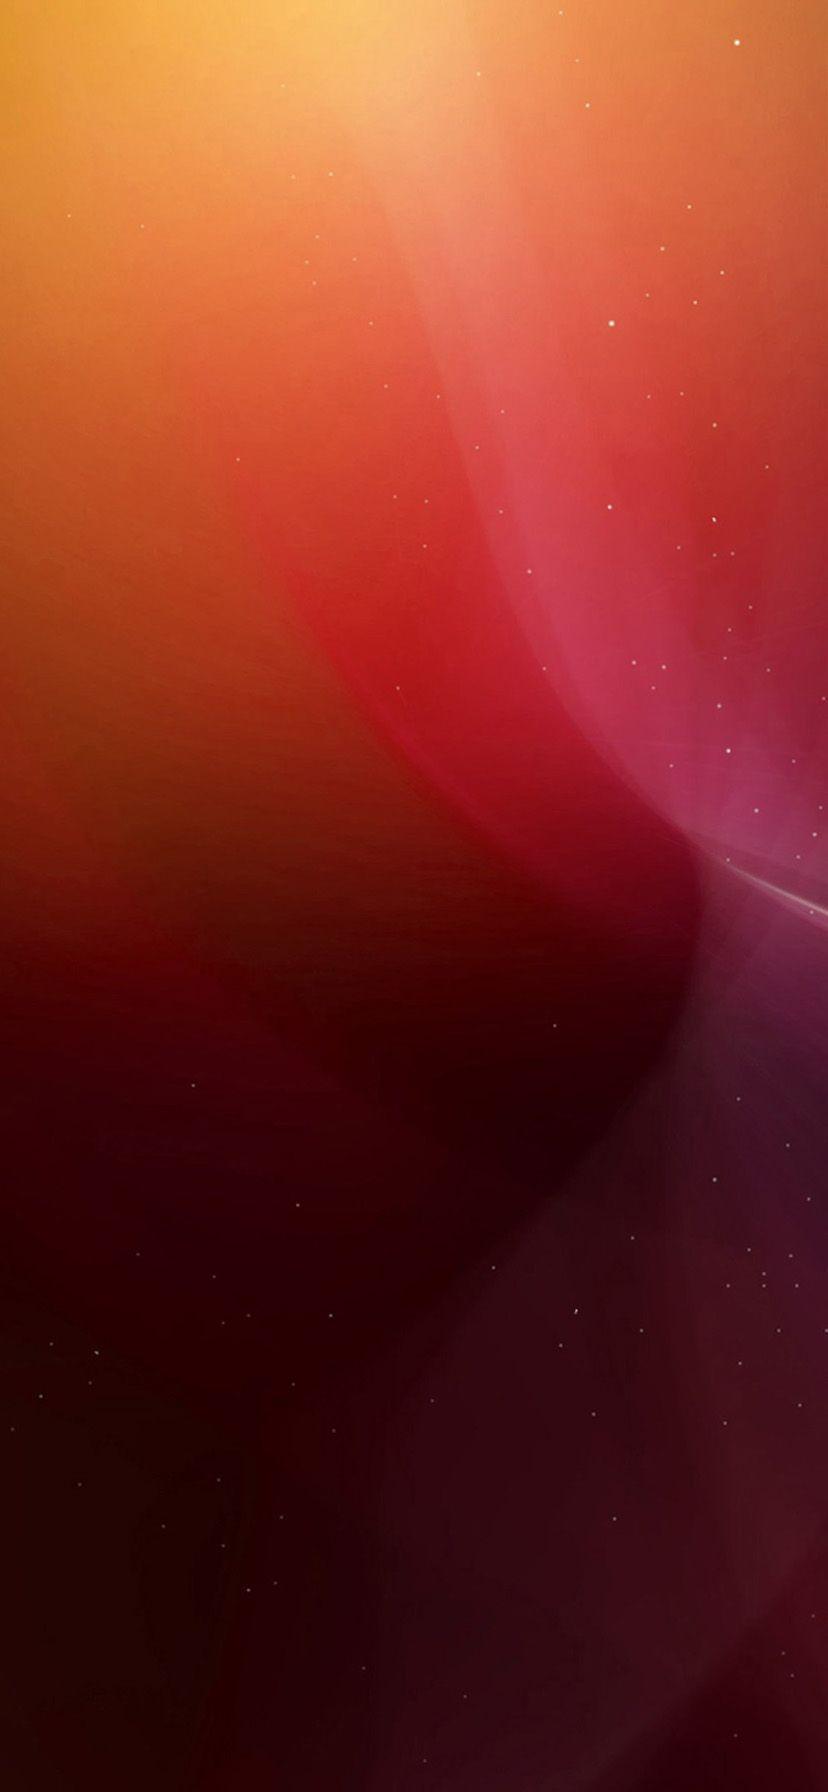 HD iPhone XR Wallpapers For vs09 aurora abstract art red orange star